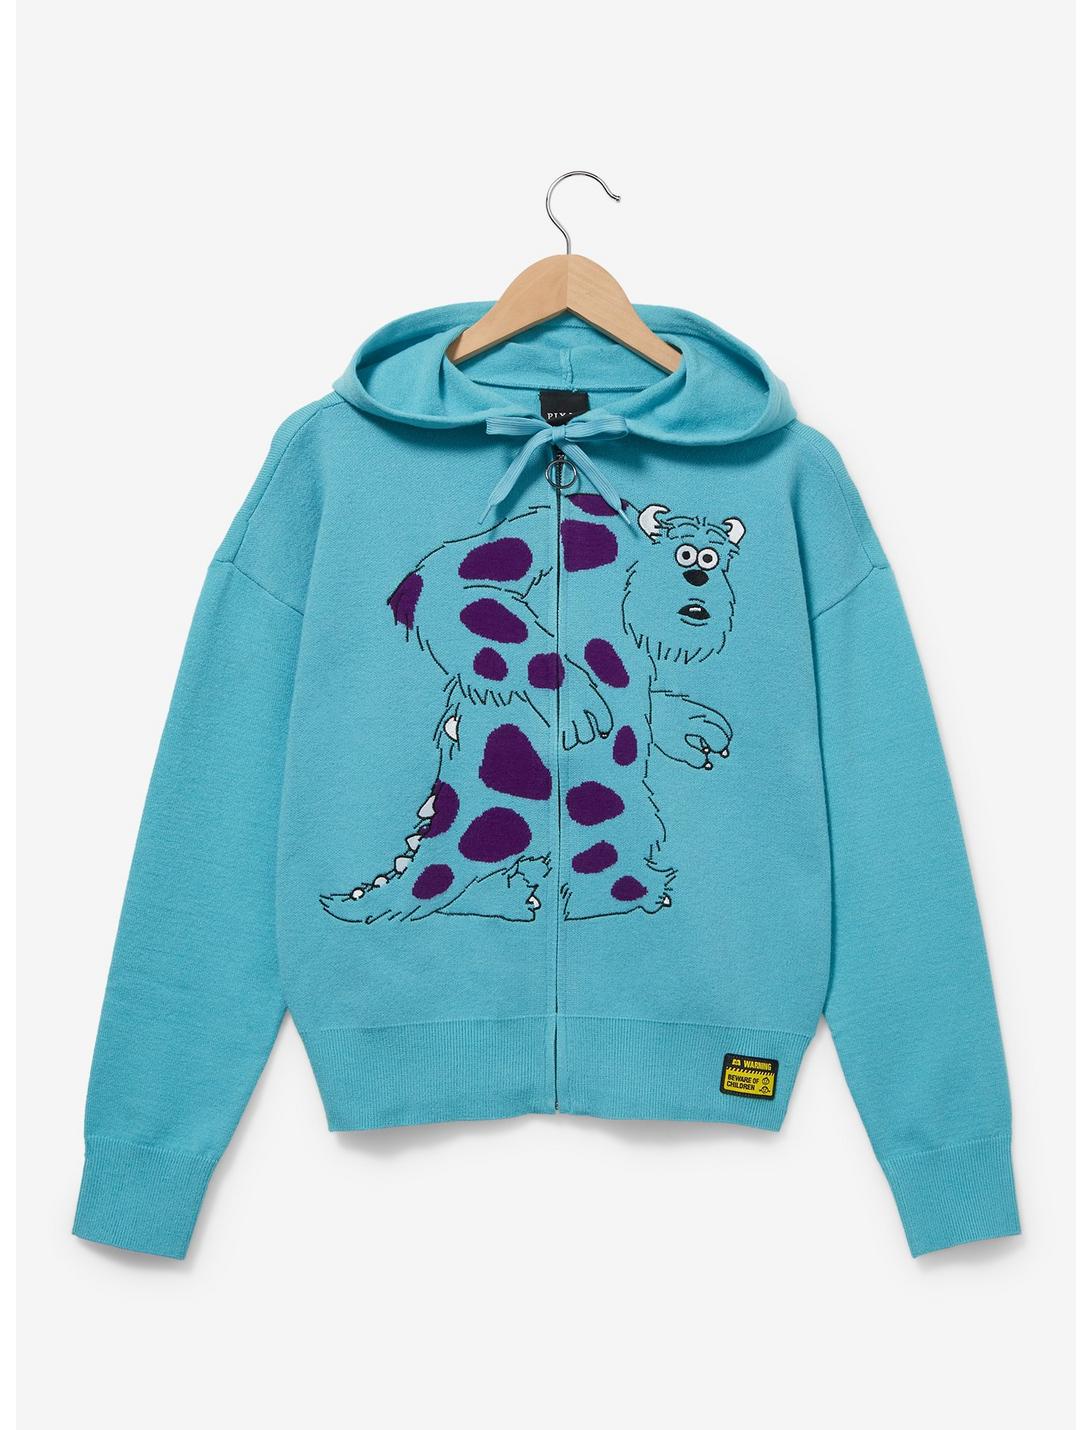 Disney Pixar Monsters, Inc. Sully Women's Plus Size Knit Zippered Hoodie - BoxLunch Exclusive, BLUE, hi-res